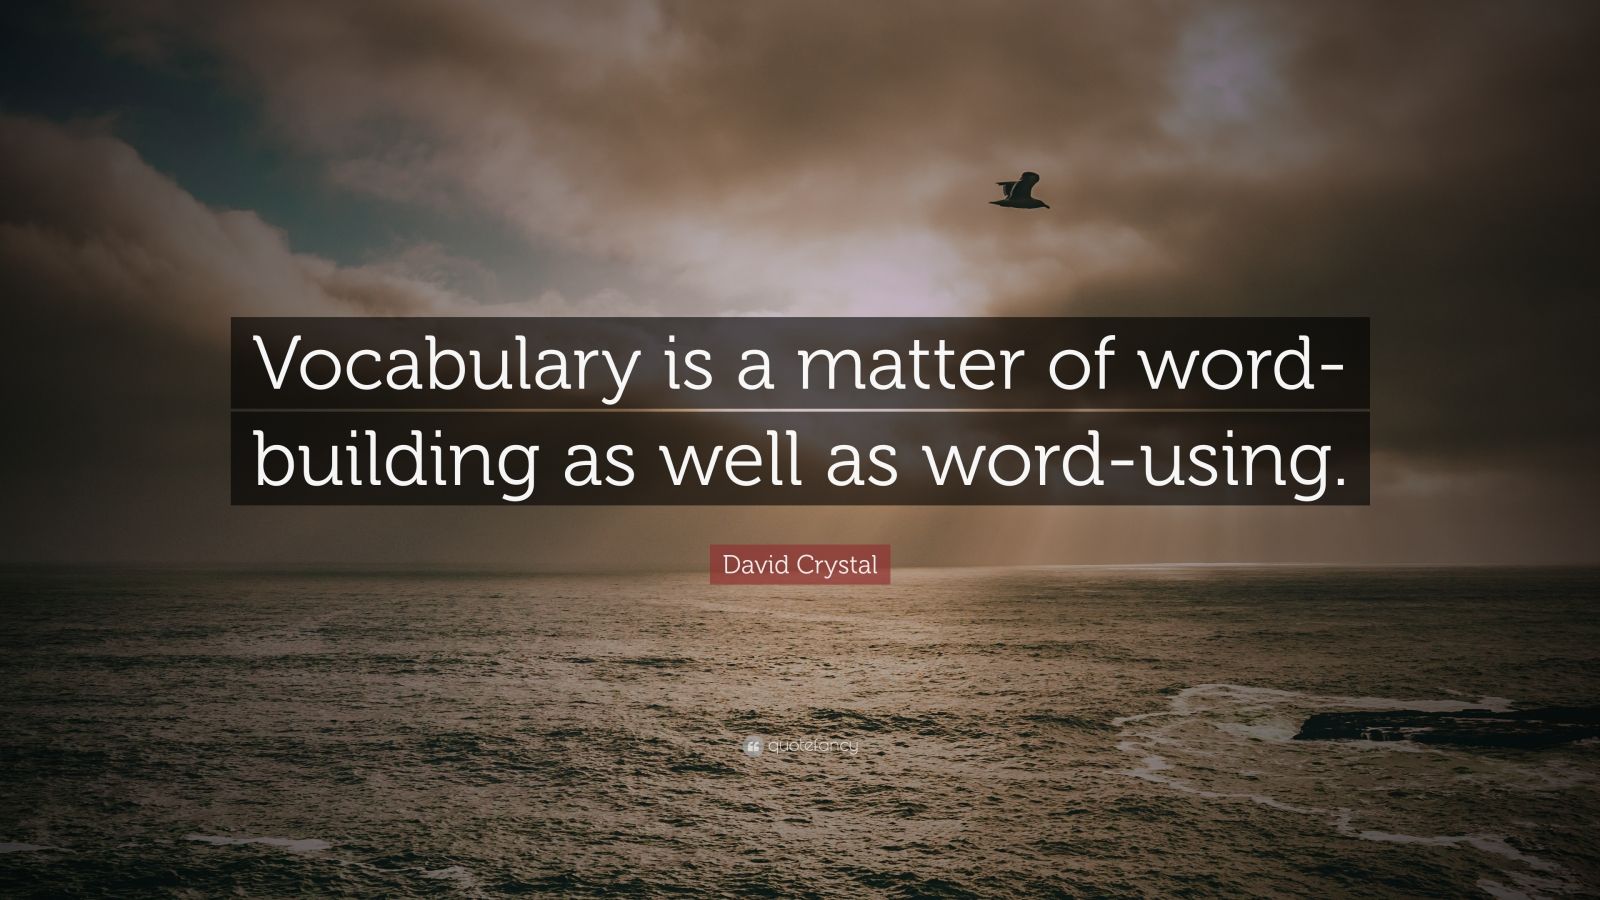 David Crystal Quote: “Vocabulary is a matter of word-building as well